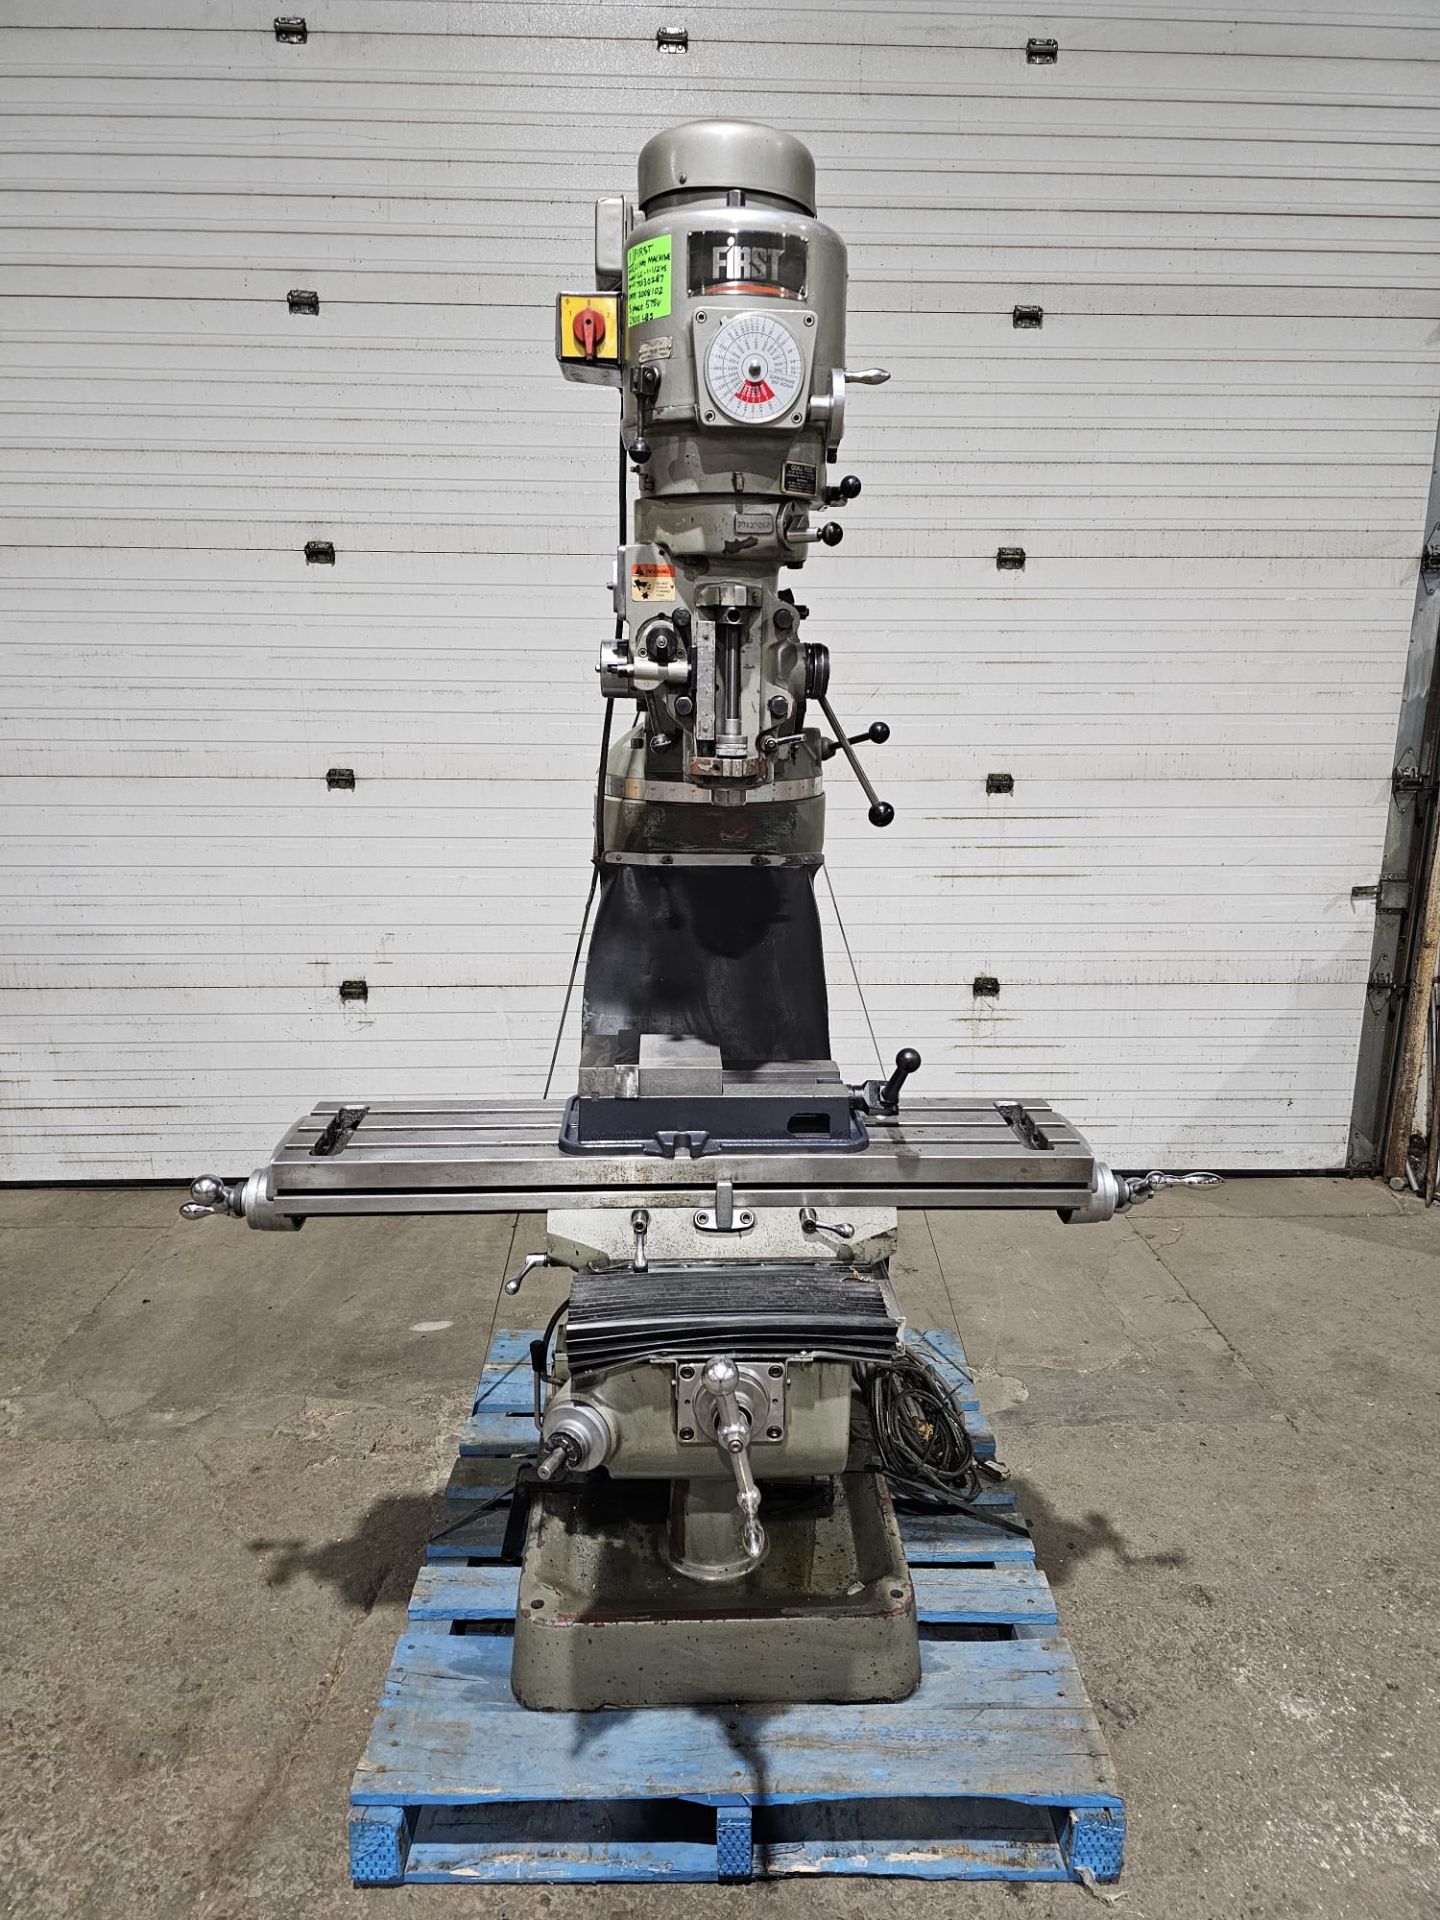 2008 FIRST MILLING MACHINE mode lC-1-1/2VS With brand new 6" accu-lock machine vice 3 phase